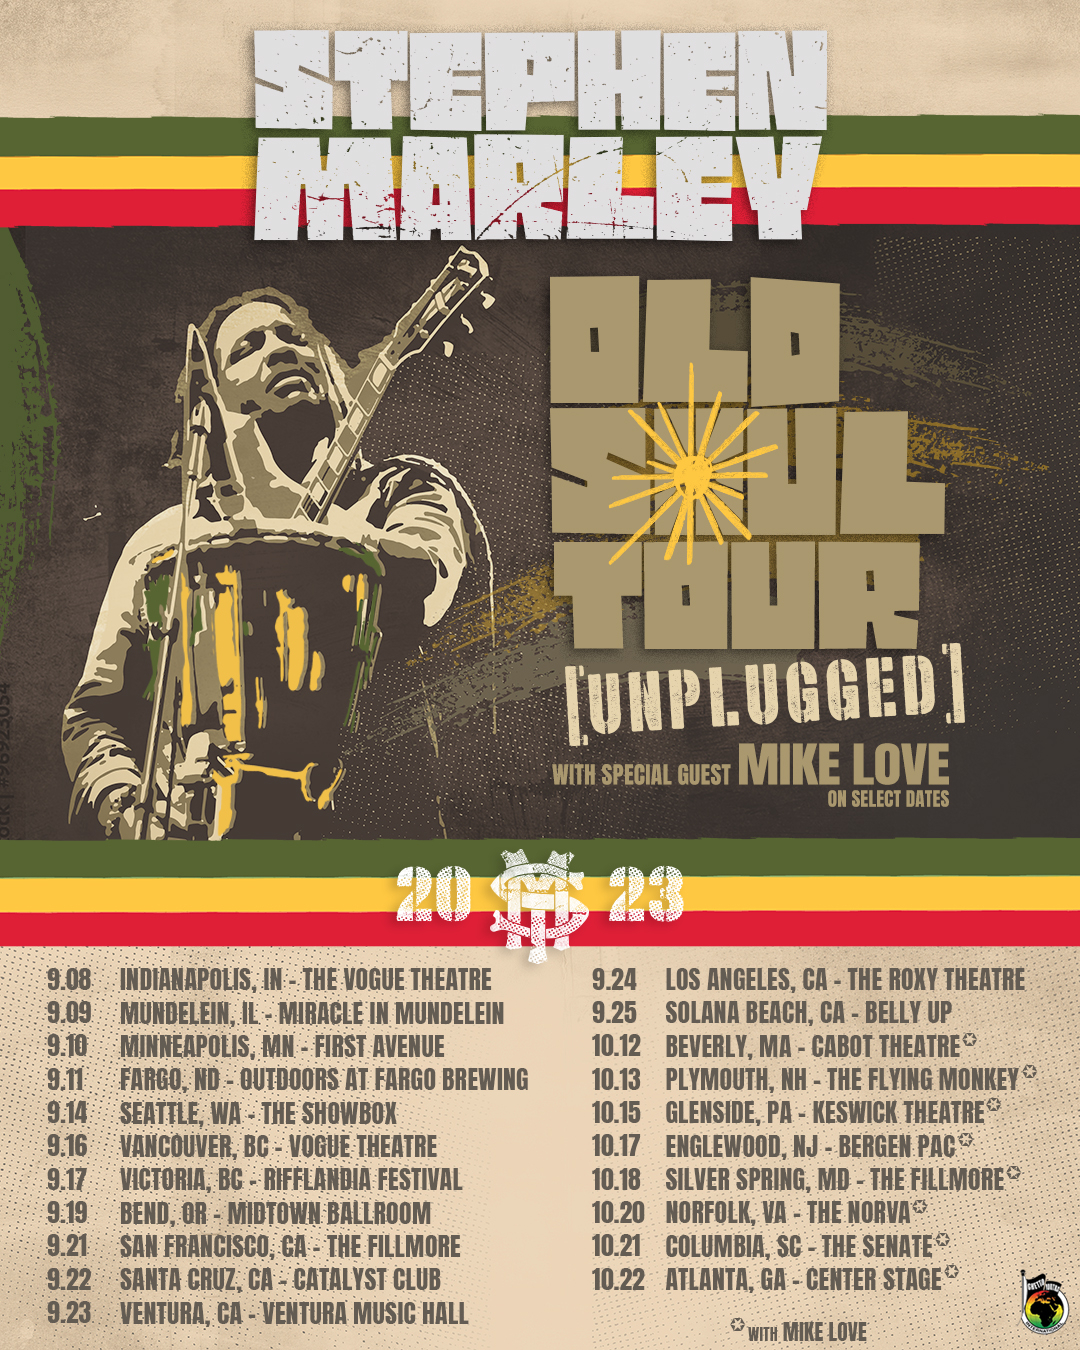 Stephen Marley Announces New Album Old Soul to Release September 